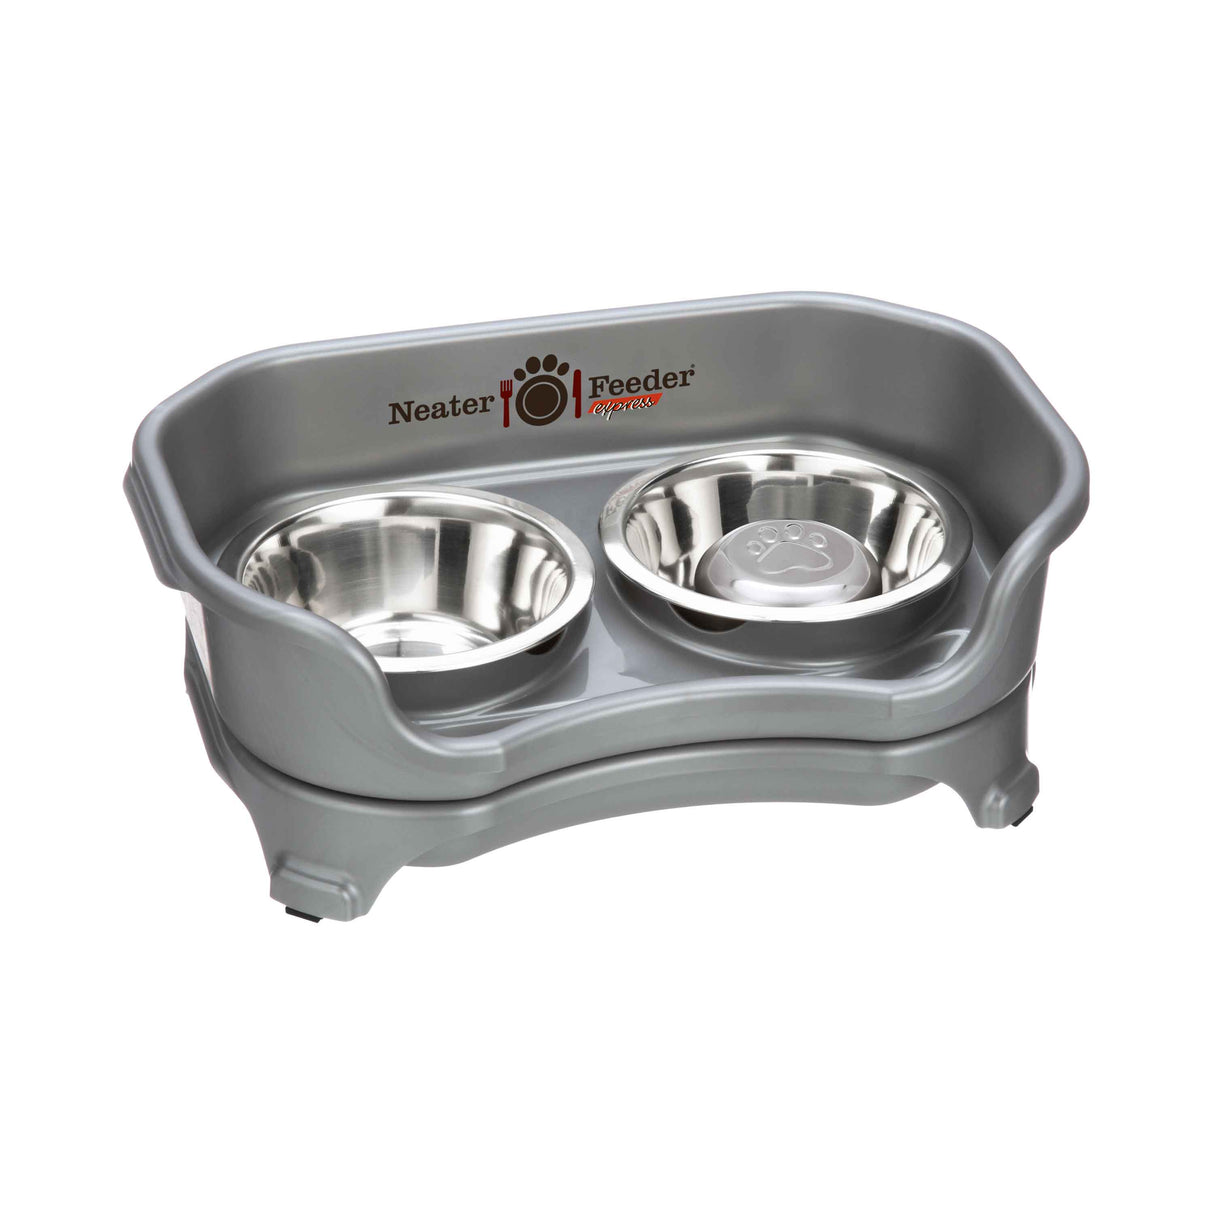 Gunmetal cat to small dog EXPRESS Neater Feeder with Stainless Steel Slow Feed Bowl